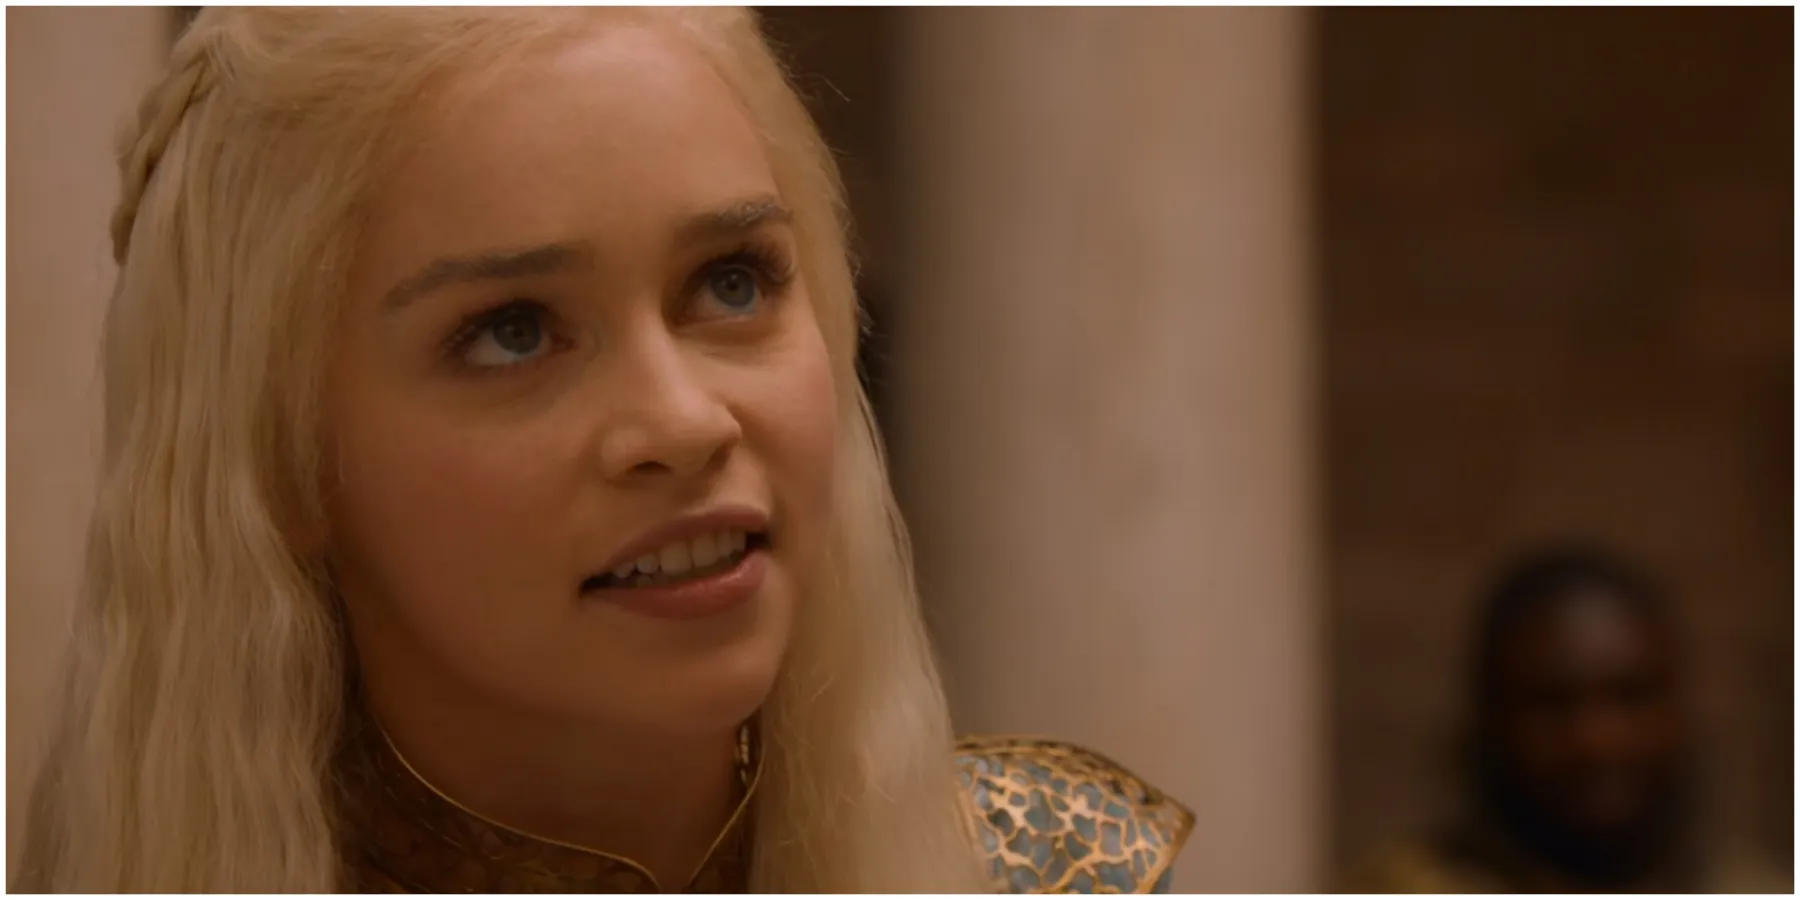 Daenerys Targaryen is angry at the Spice King in Game of Thrones